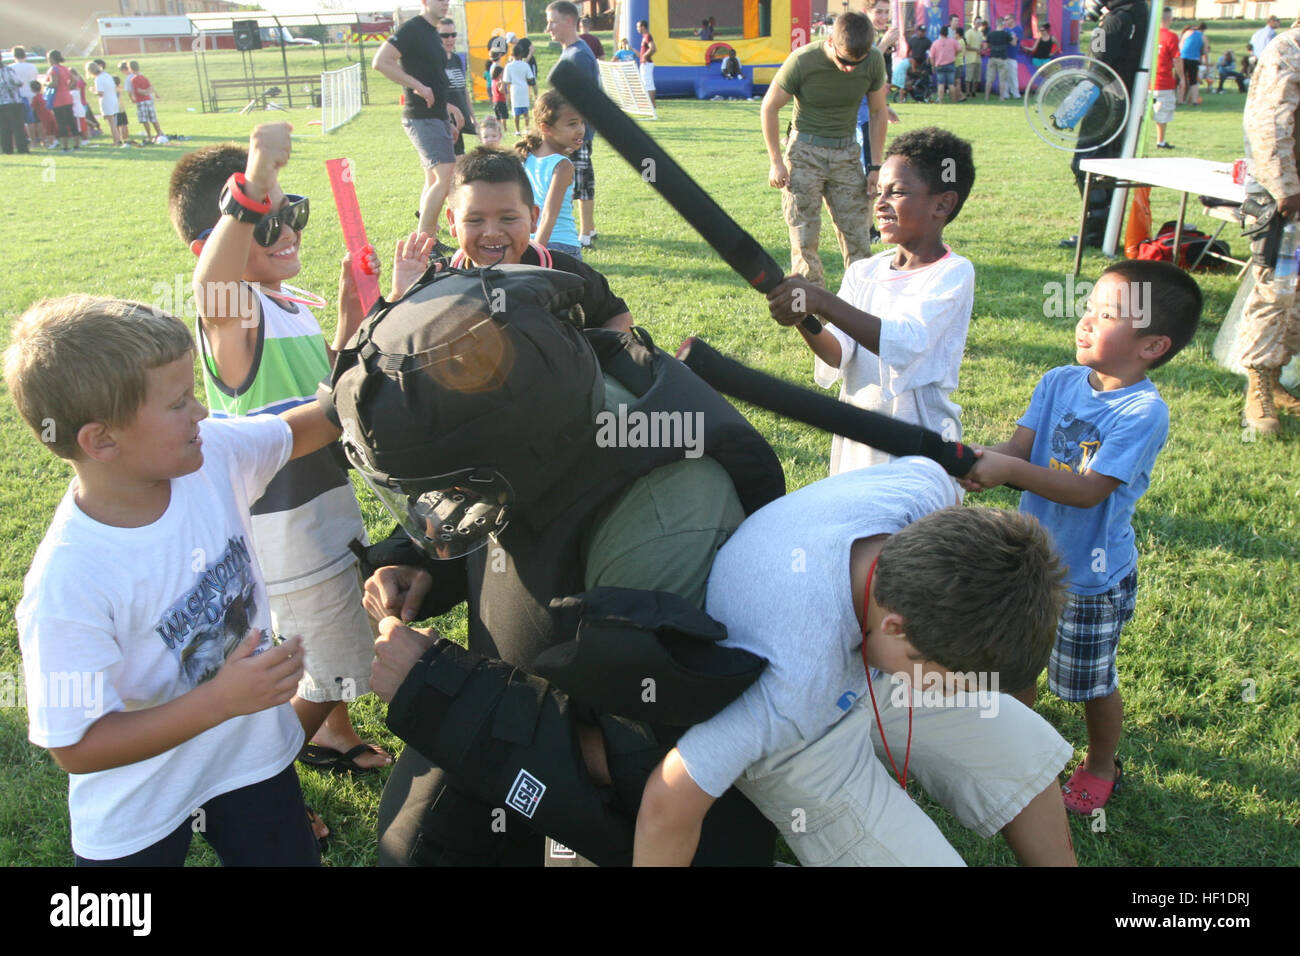 Sgt. Paul Zieniuk, a small-arms repairman with Special-Purpose Marine-Air Ground Task Force Africa 13, demonstrates the resilience of riot gear while children strike him with batons at the National Night Out event aboard Naval Air Station Sigonella, Italy, Aug. 6, 2013. Marines and sailors with Special-Purpose MAGTF Africa participated in the event with a static display of weapons, both lethal and non-lethal. Special-Purpose MAGTF Africa continues to build relationships with the community while simultaneously strengthening U.S. Africa Command and U.S. Marine Corps Forces Africa's ability to as Stock Photo